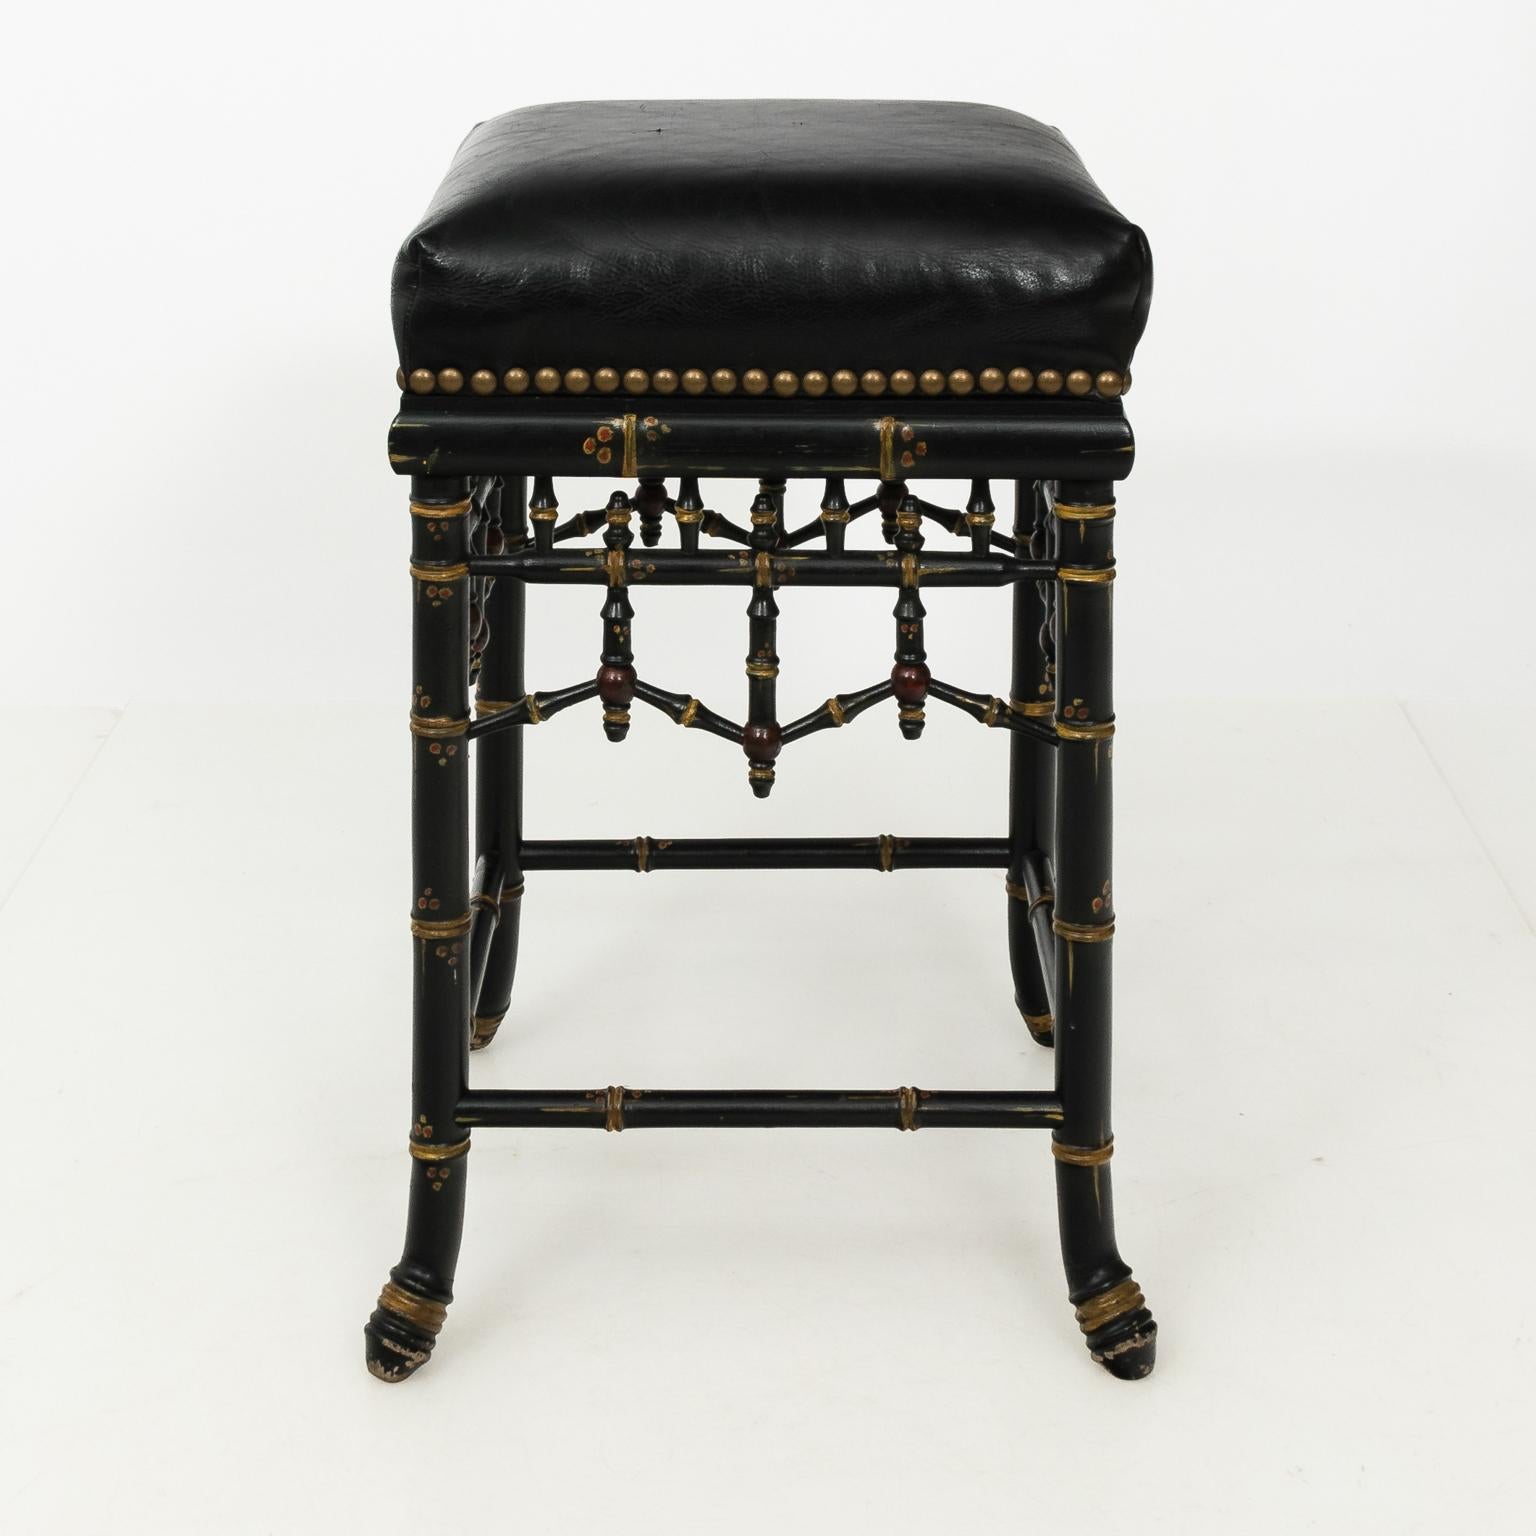 Pair of Eastlake style black painted Bamboo bar stools with leather upholstered seats, circa 20th century. These stools also feature nail head trim, turned spindles, and a box stretcher.
   